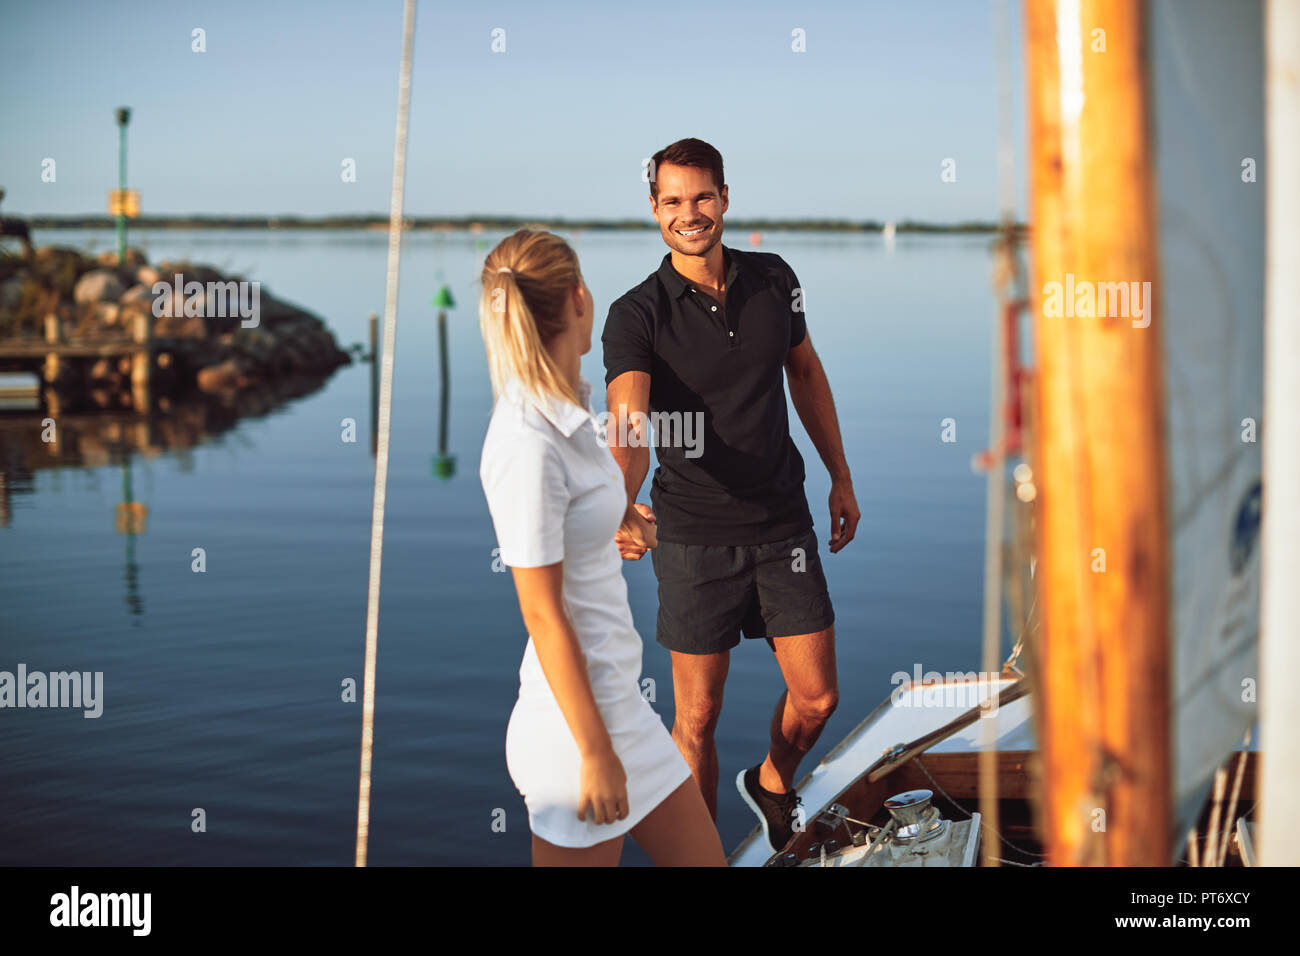 Young woman leading her husband by the hand along the deck of a yacht while enjoying a sunny day sailing together Stock Photo